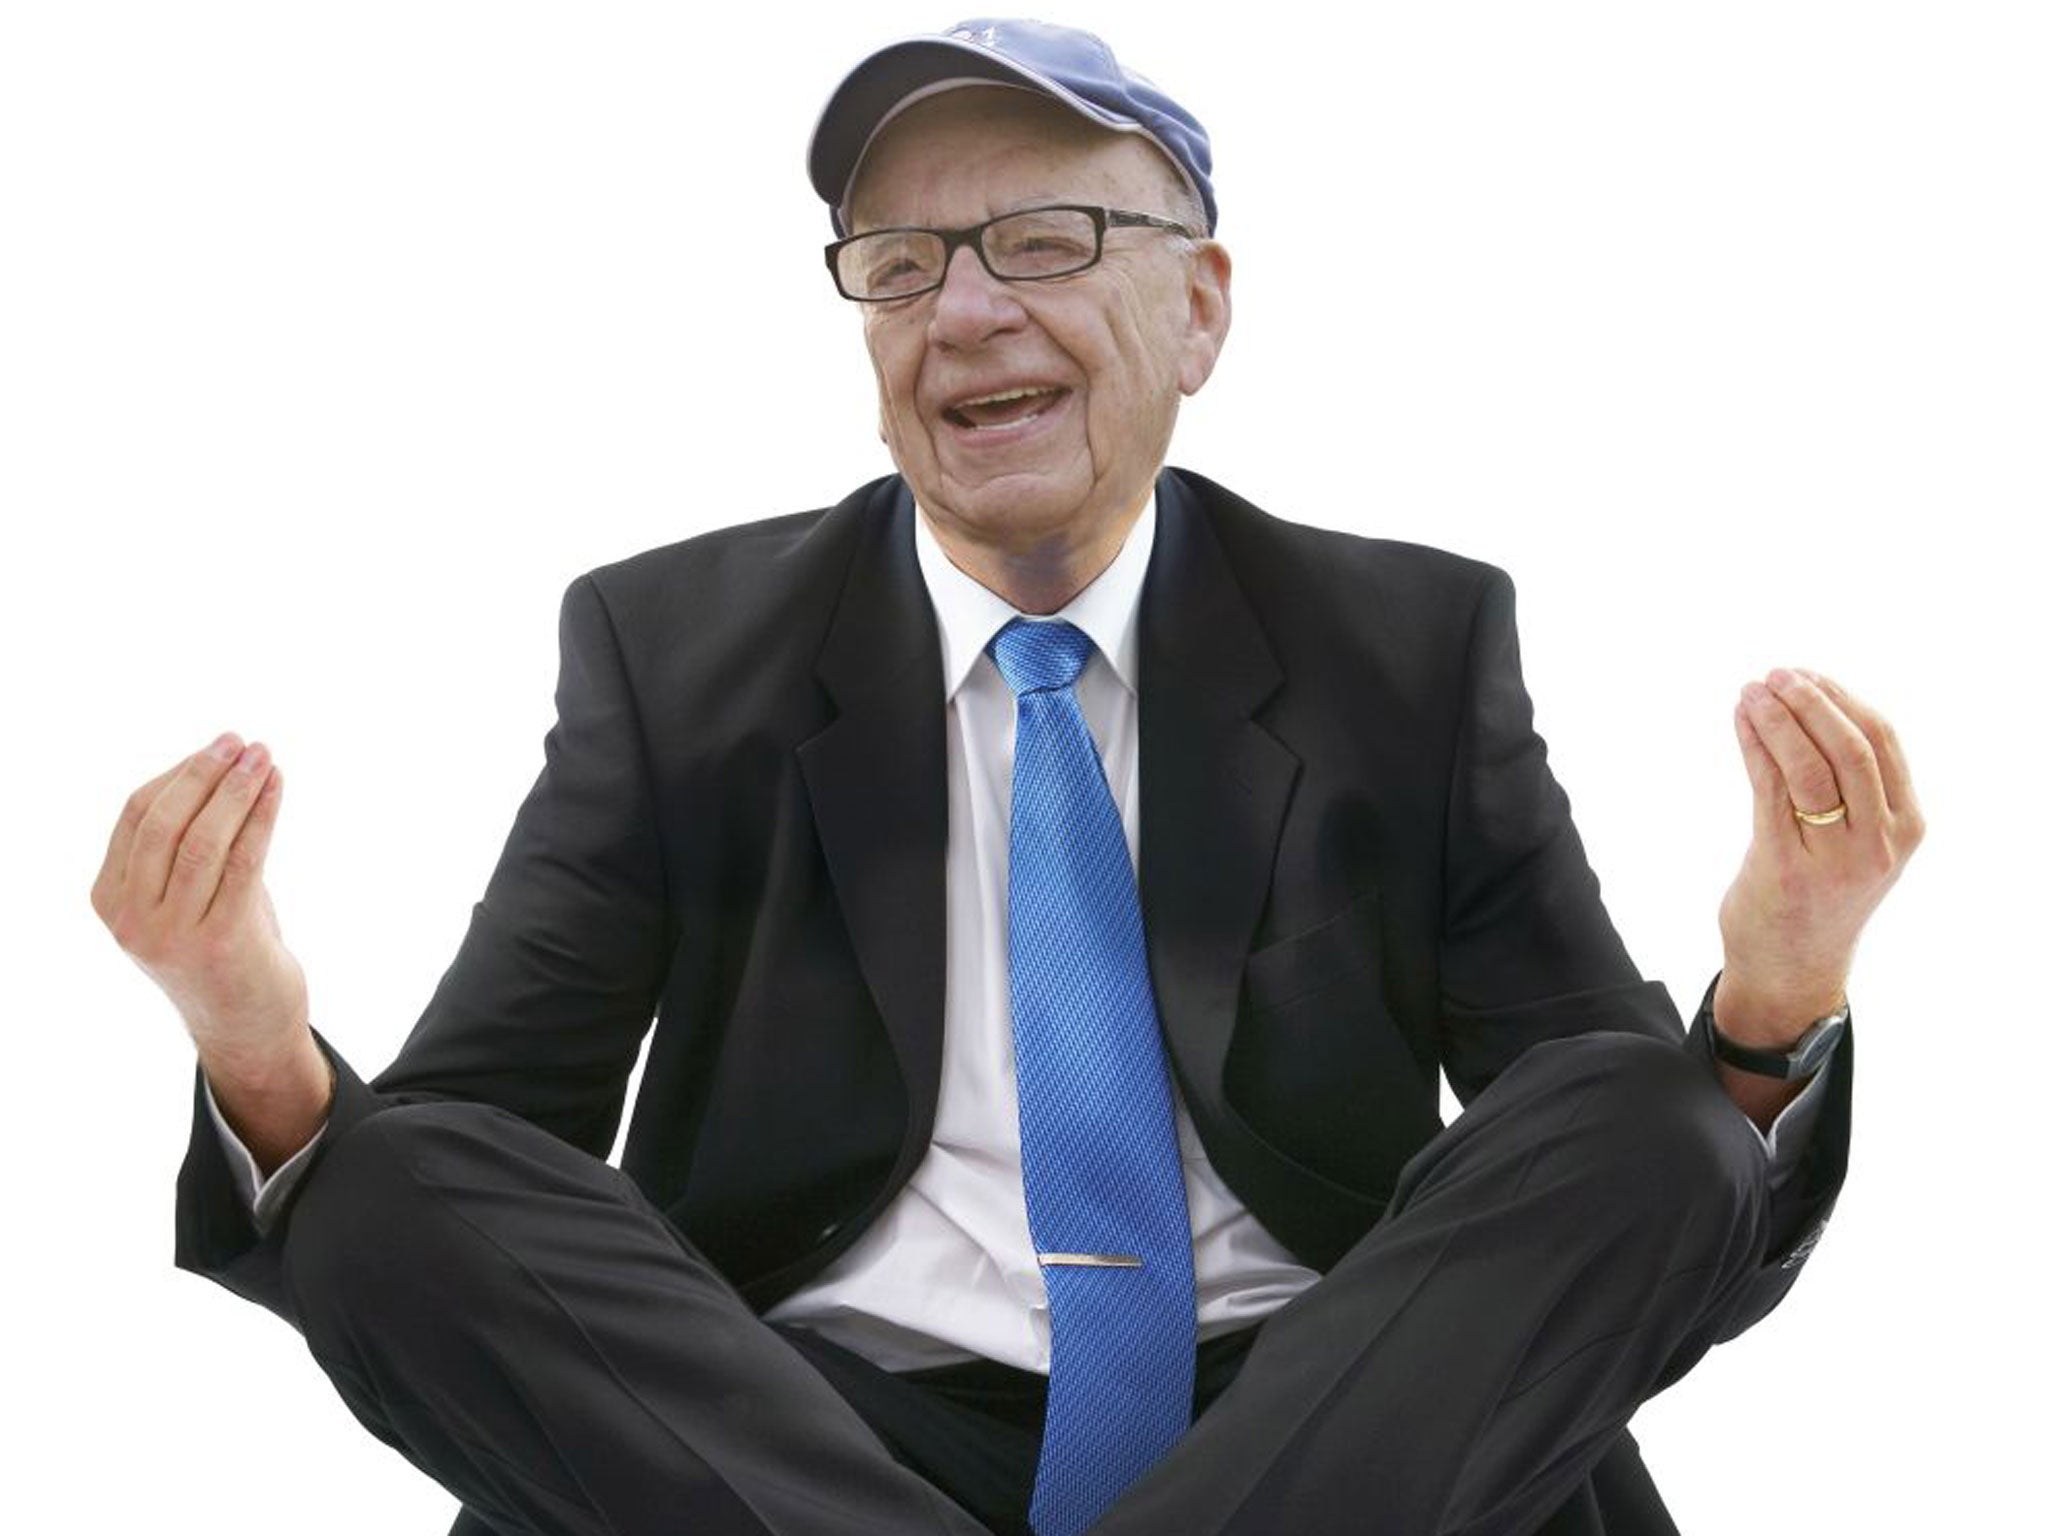 Rupert Murdoch has stated that he is trying transcendental meditation